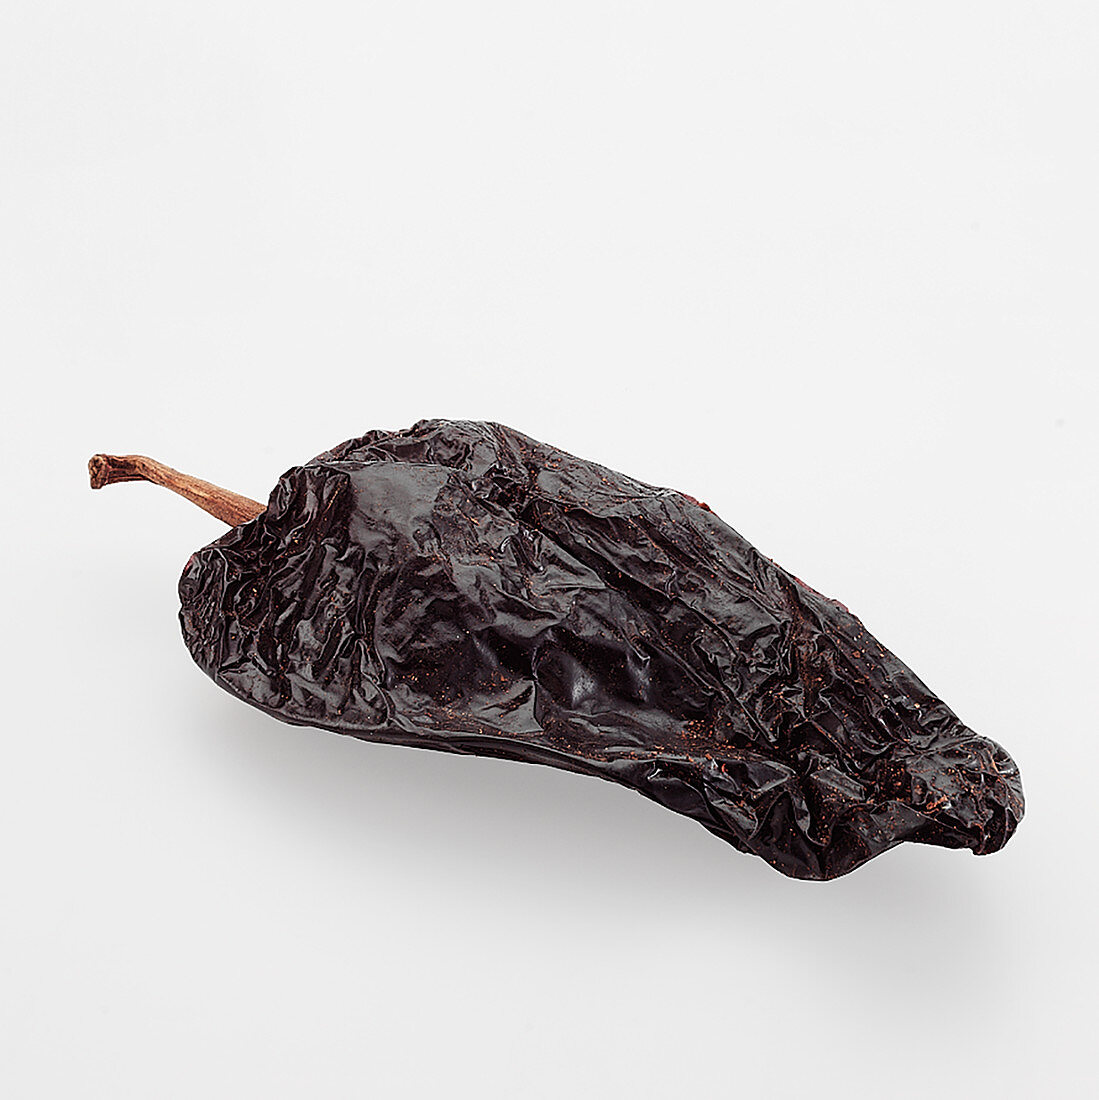 A dried Ancho Chile on white background